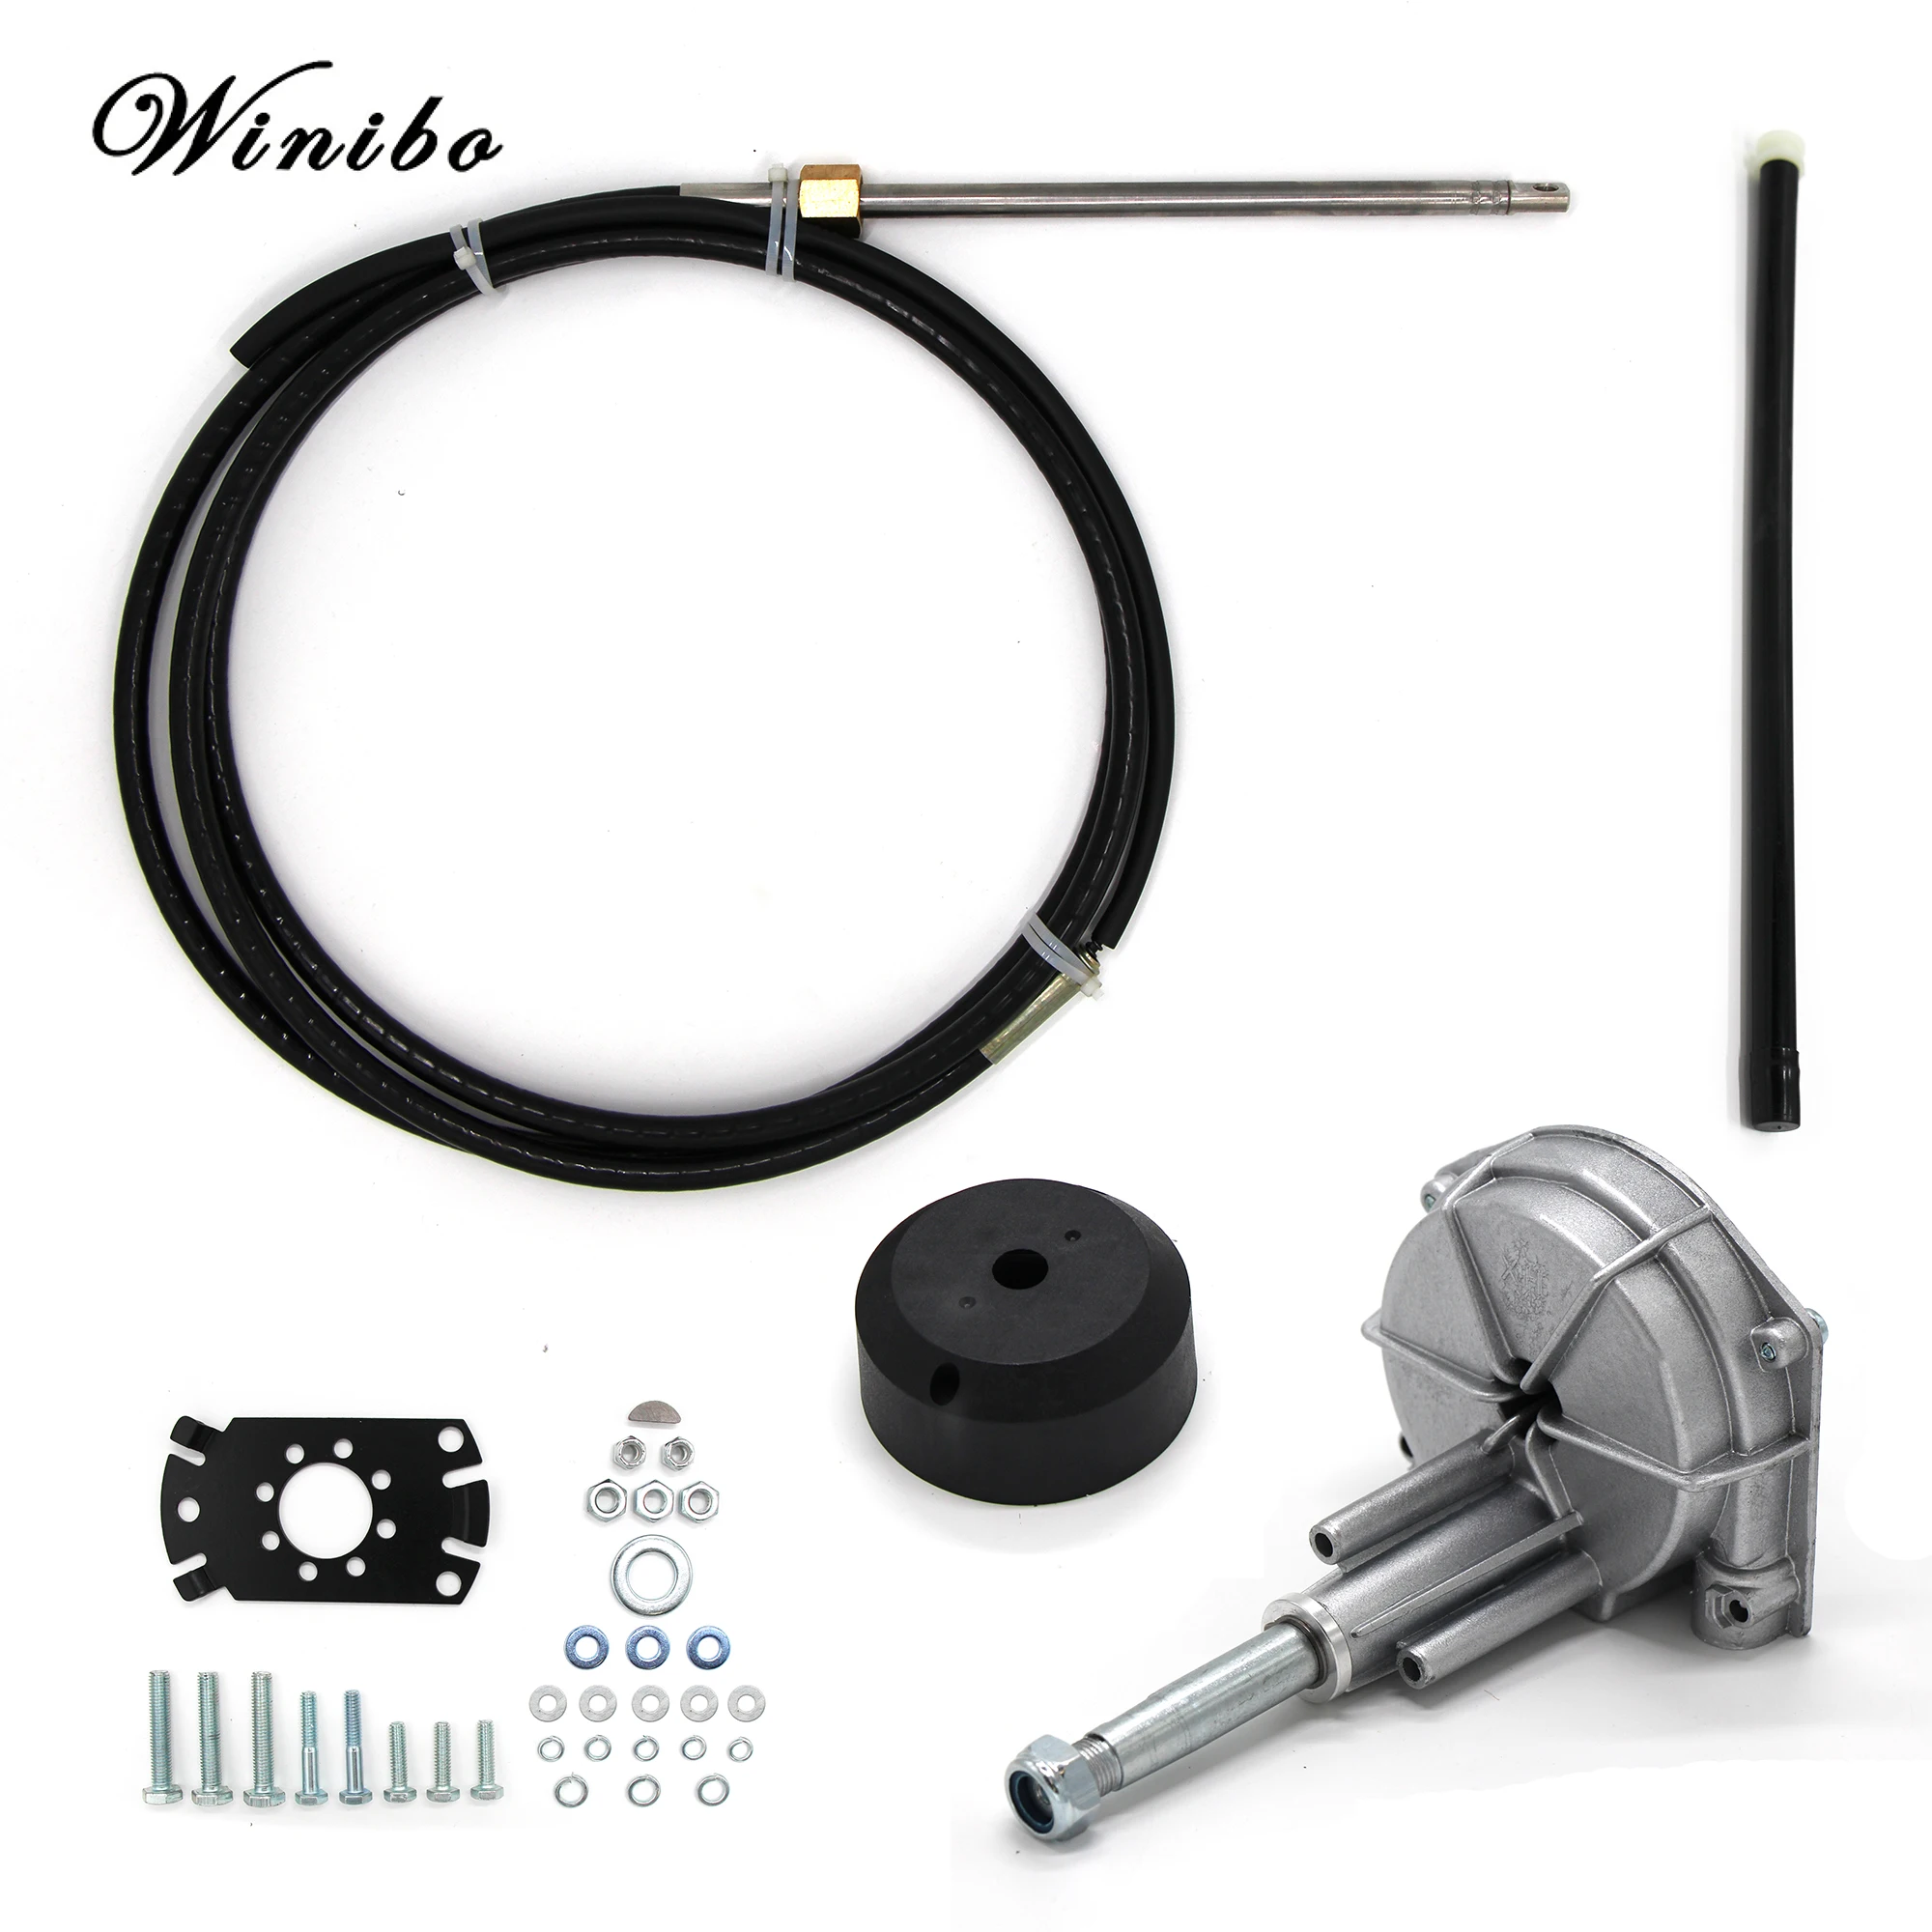 Marine Outboard Mechanical Steering System With Boat Steering Cable & Wheel Helm